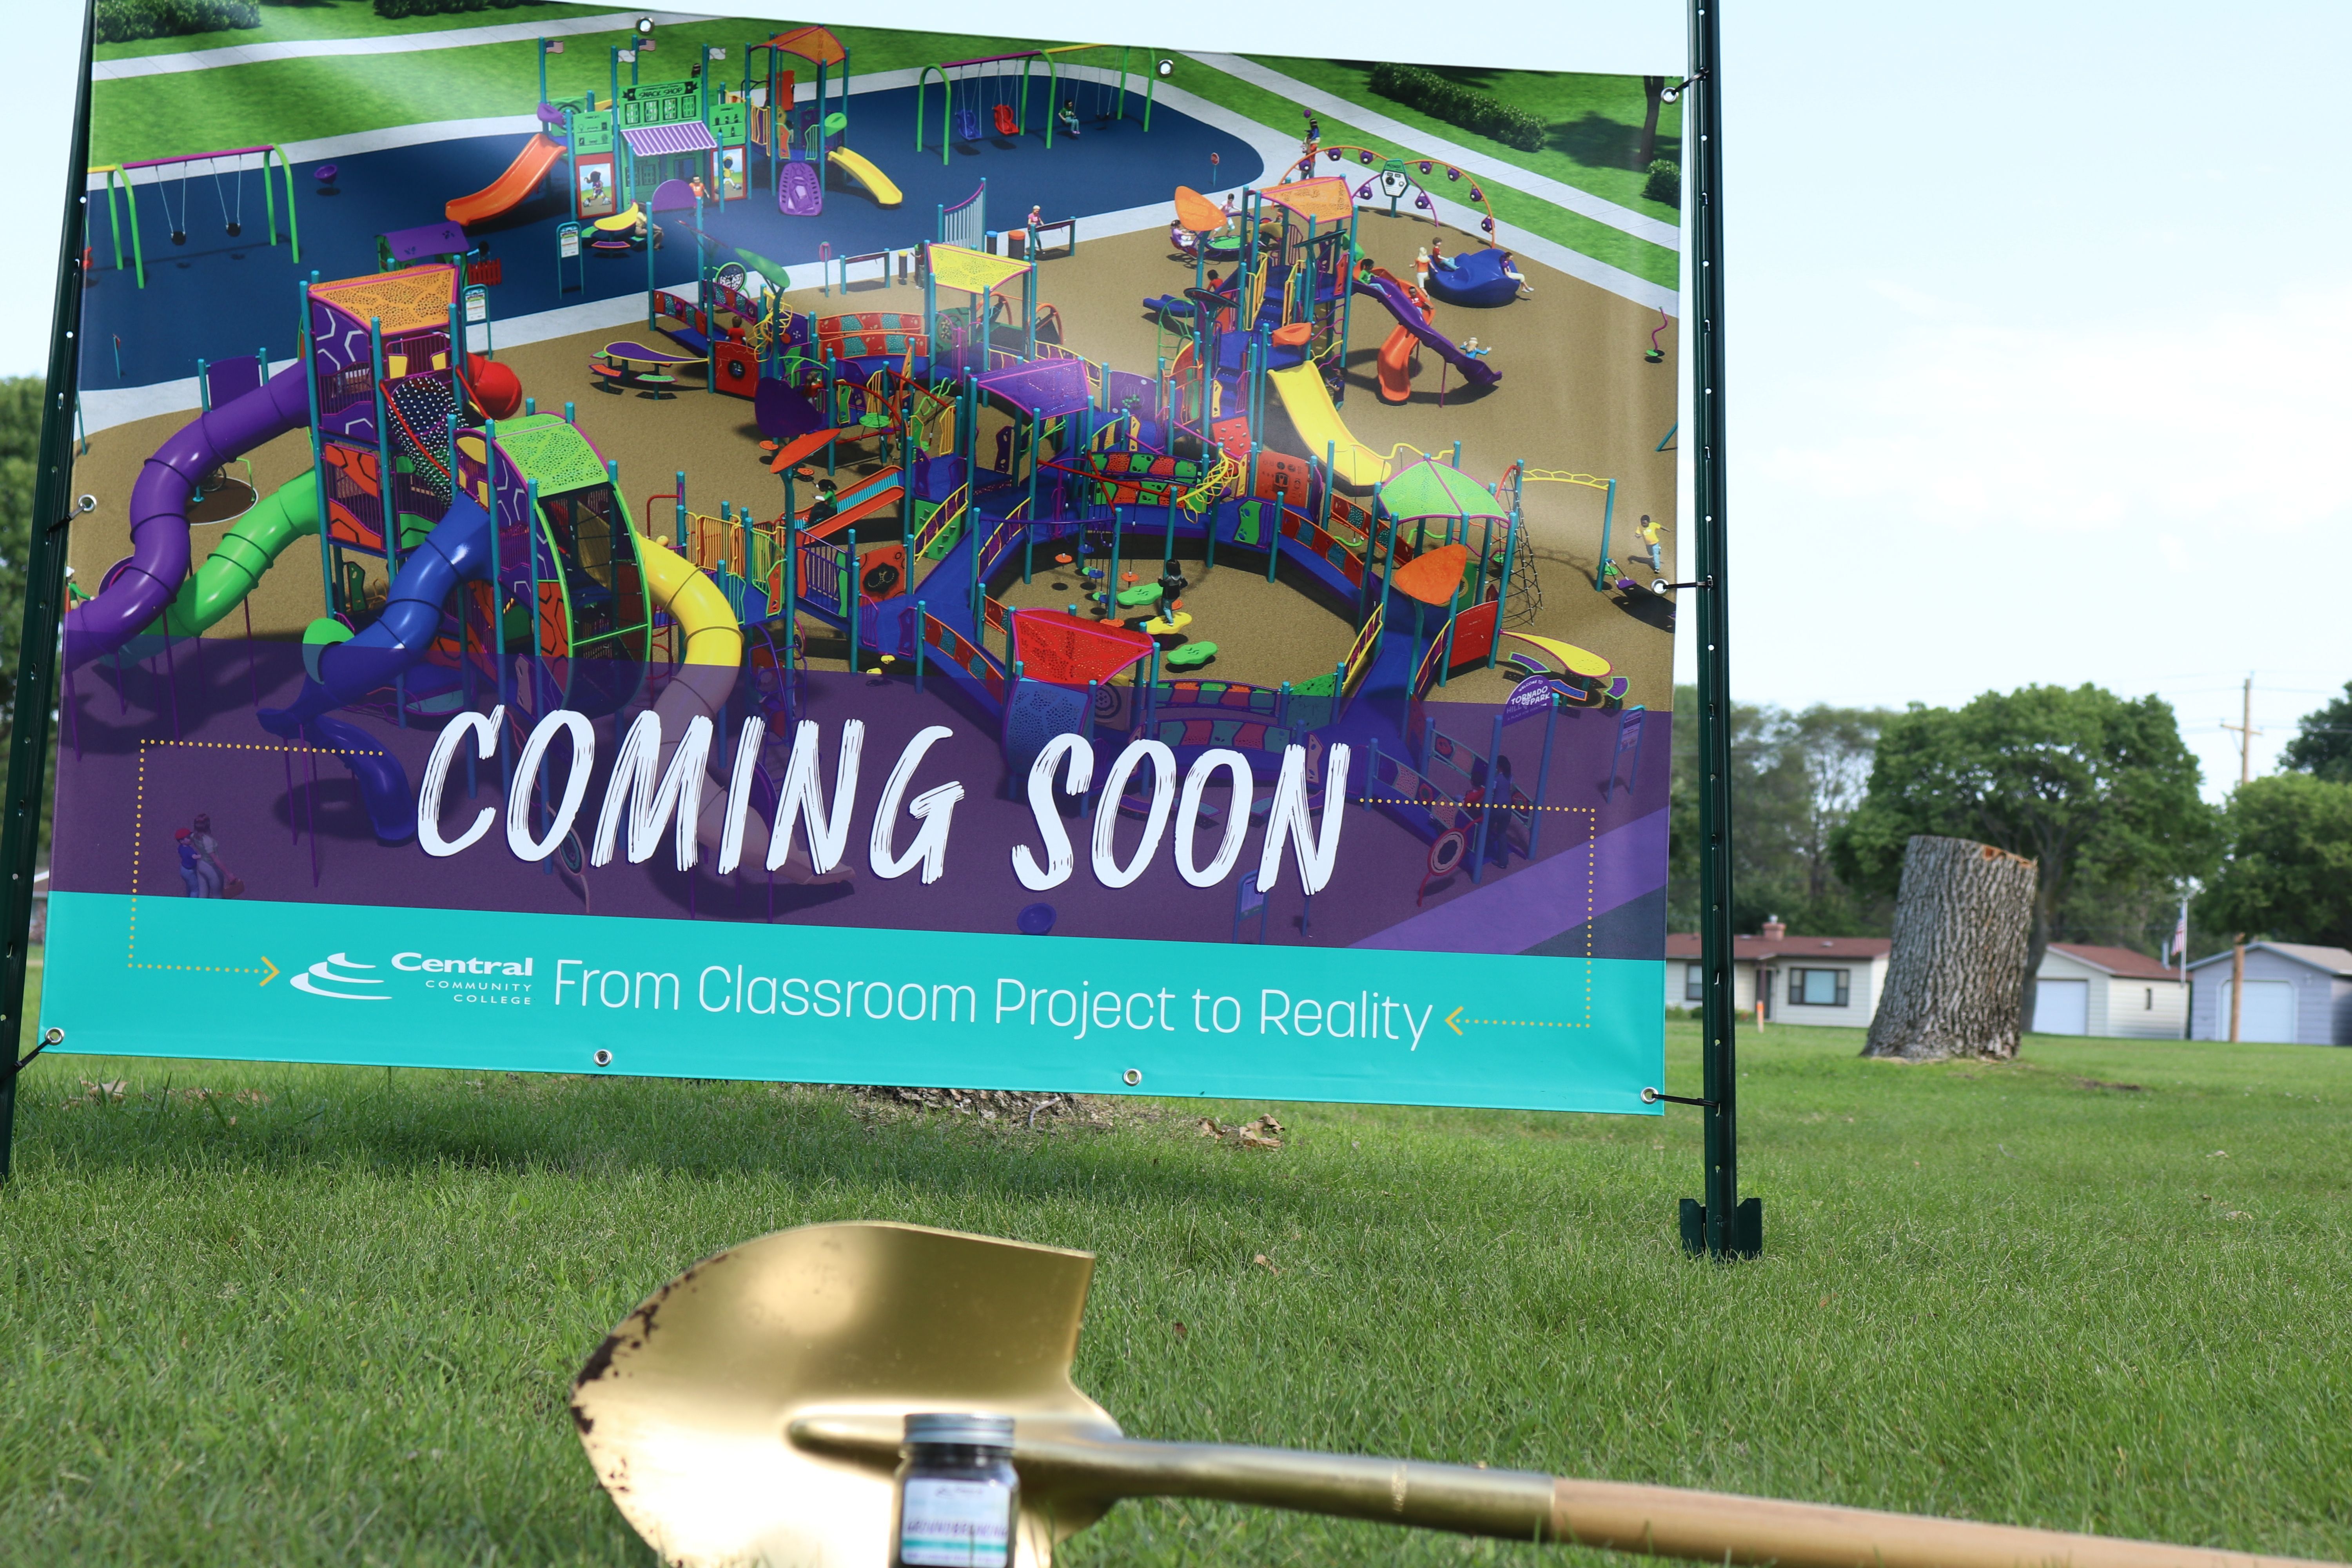 Groundbreaking at Ryder Park for all inclusive playground